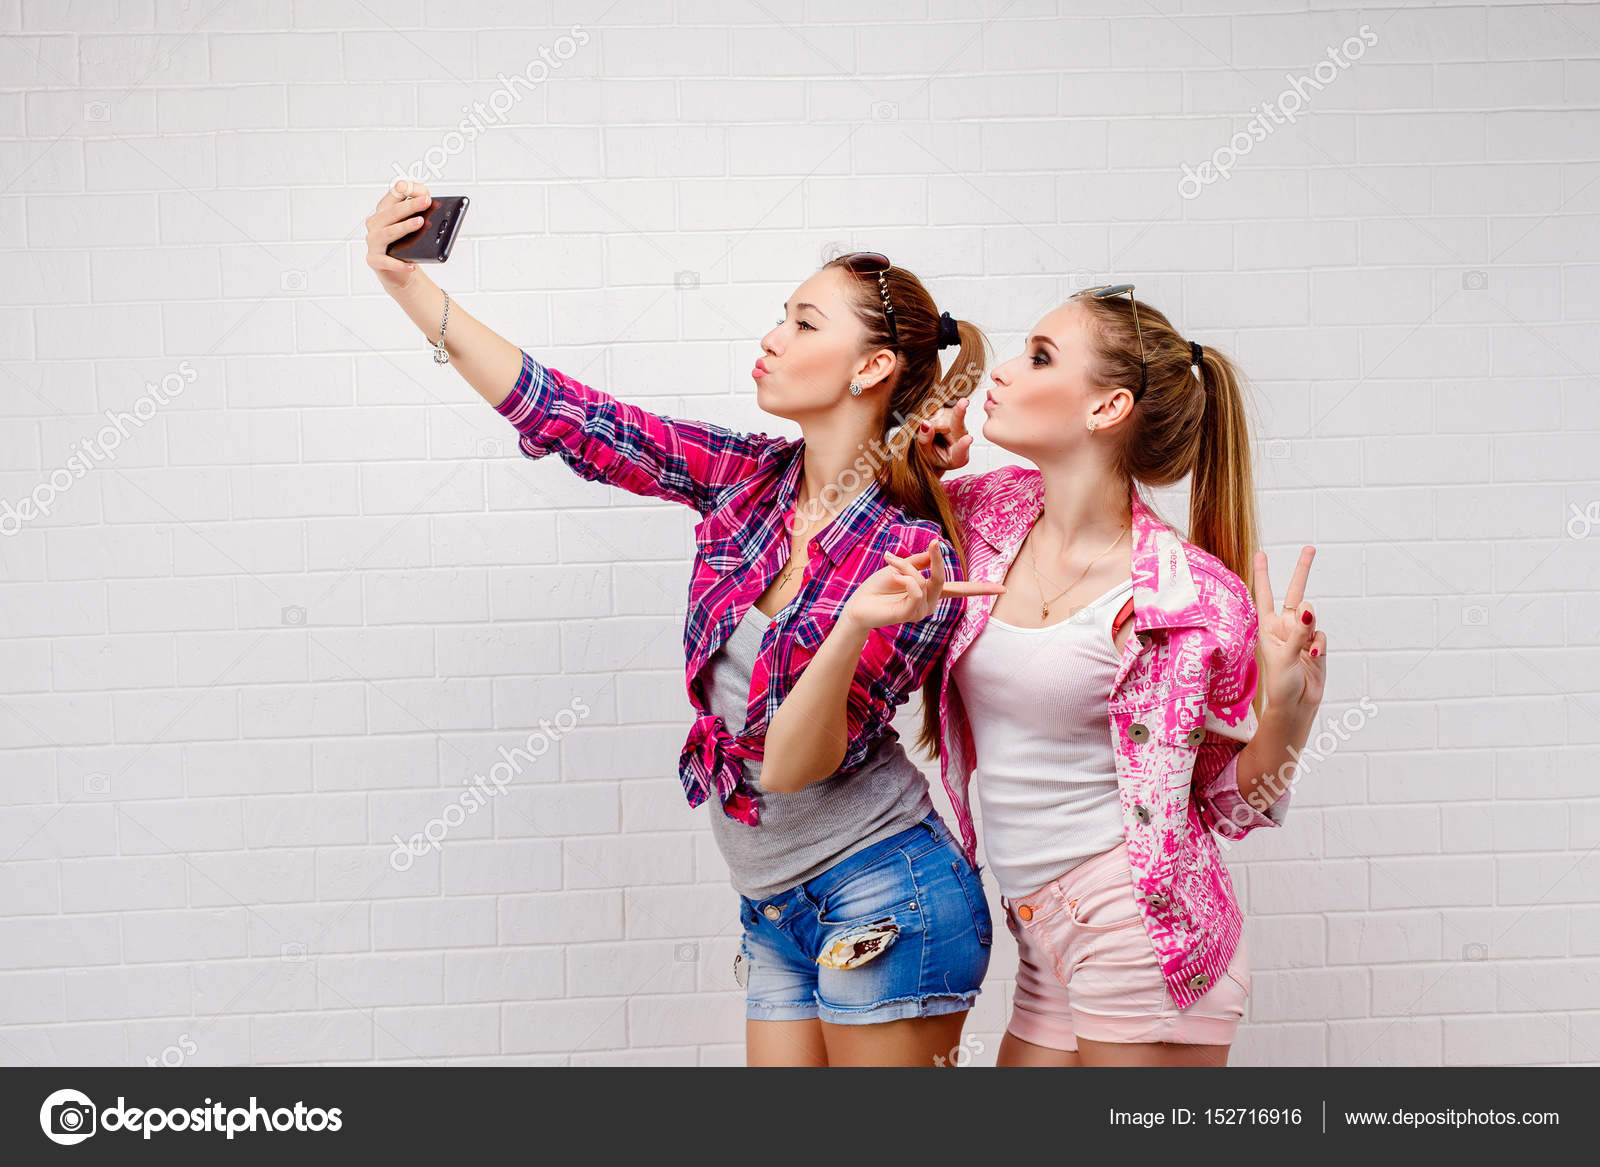 Funny Couple Pose For A Selfie Stock Photo, Picture and Royalty Free Image.  Image 58769515.